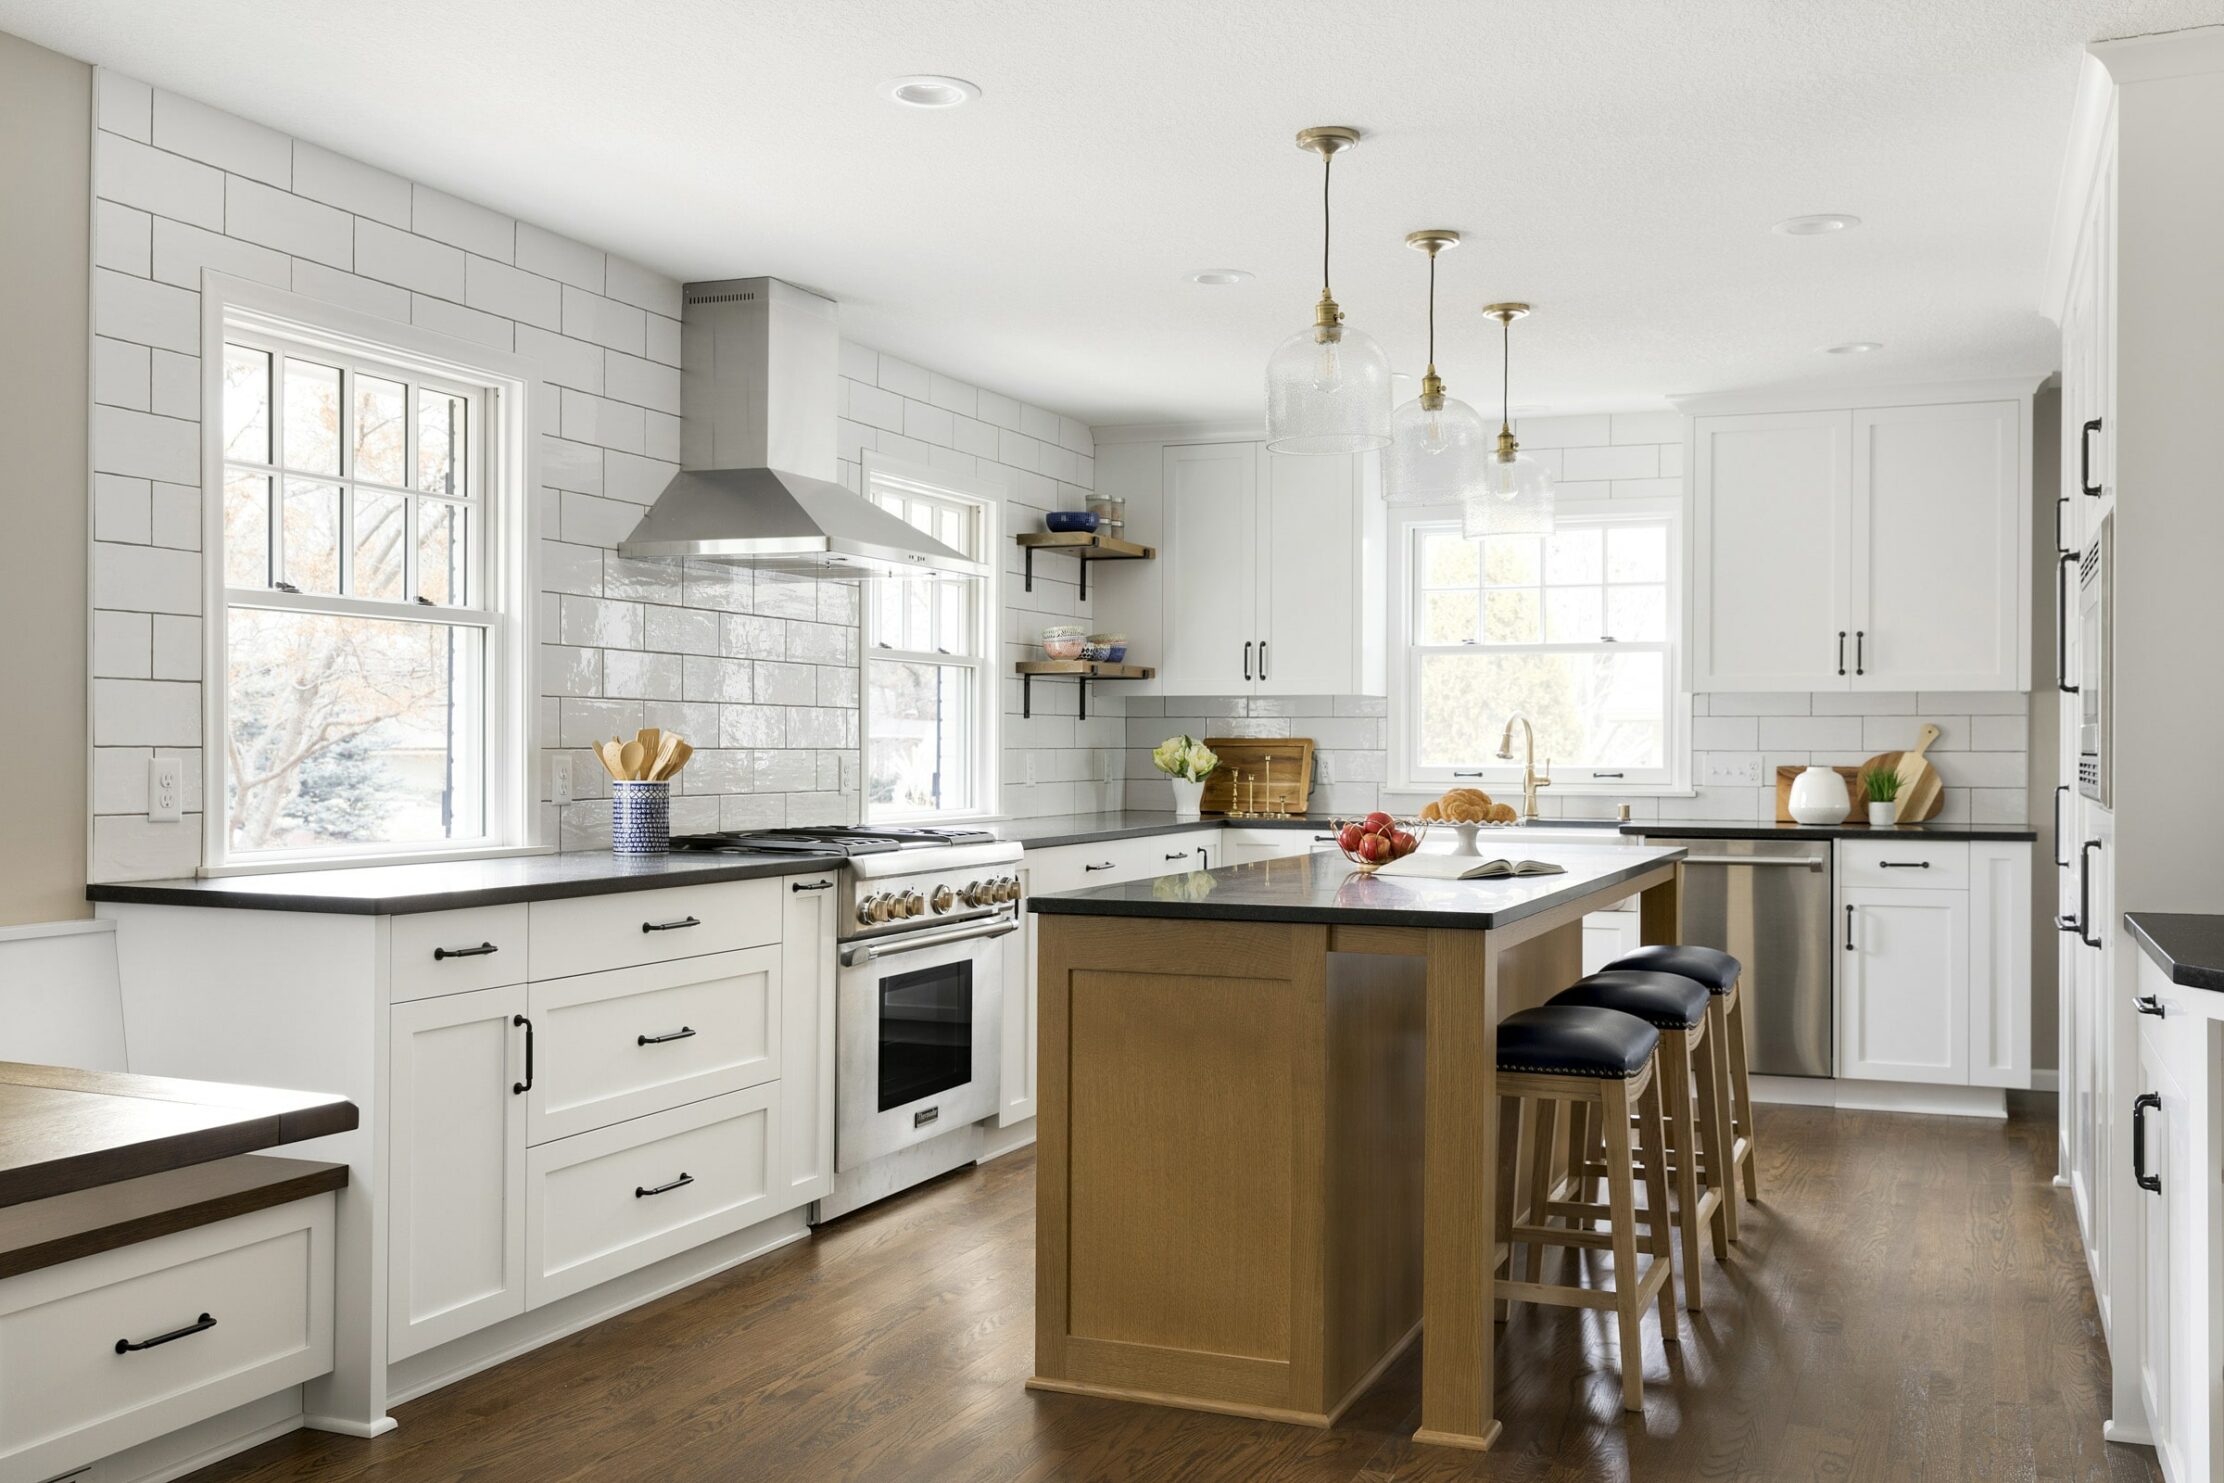 Minnesota kitchen remodel with gold light fixtures, white tile backsplash, and wood island—part of the Parade of Homes Remodelers Showcase. 